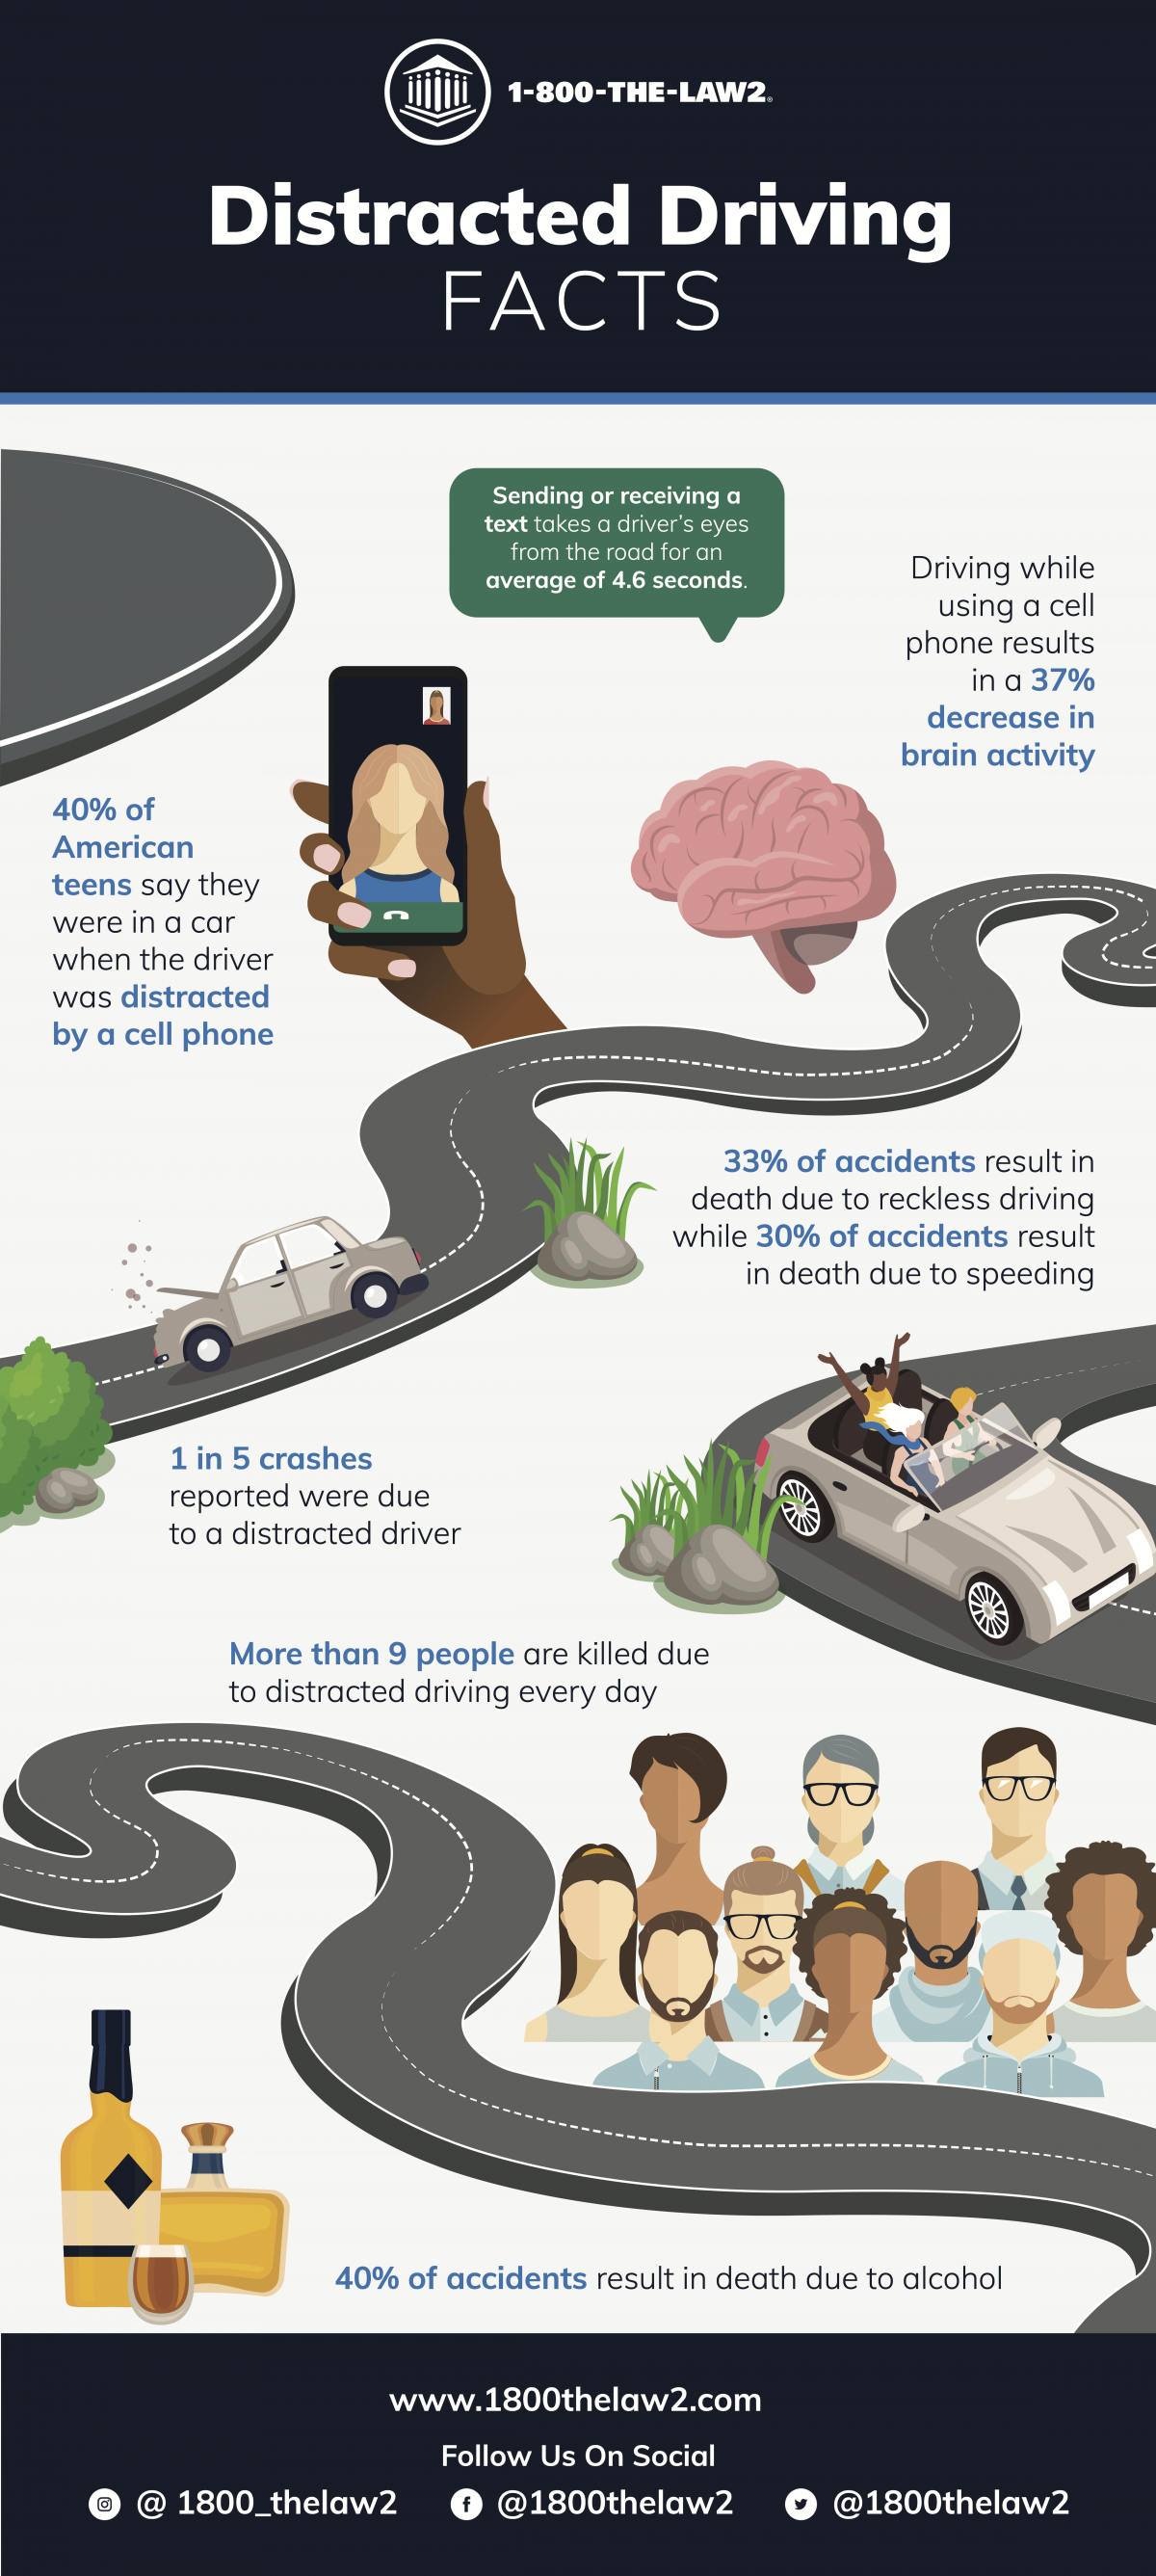 April is national distracted driving awareness month. Distracted Driving Infographic by 1800thelaw2.com